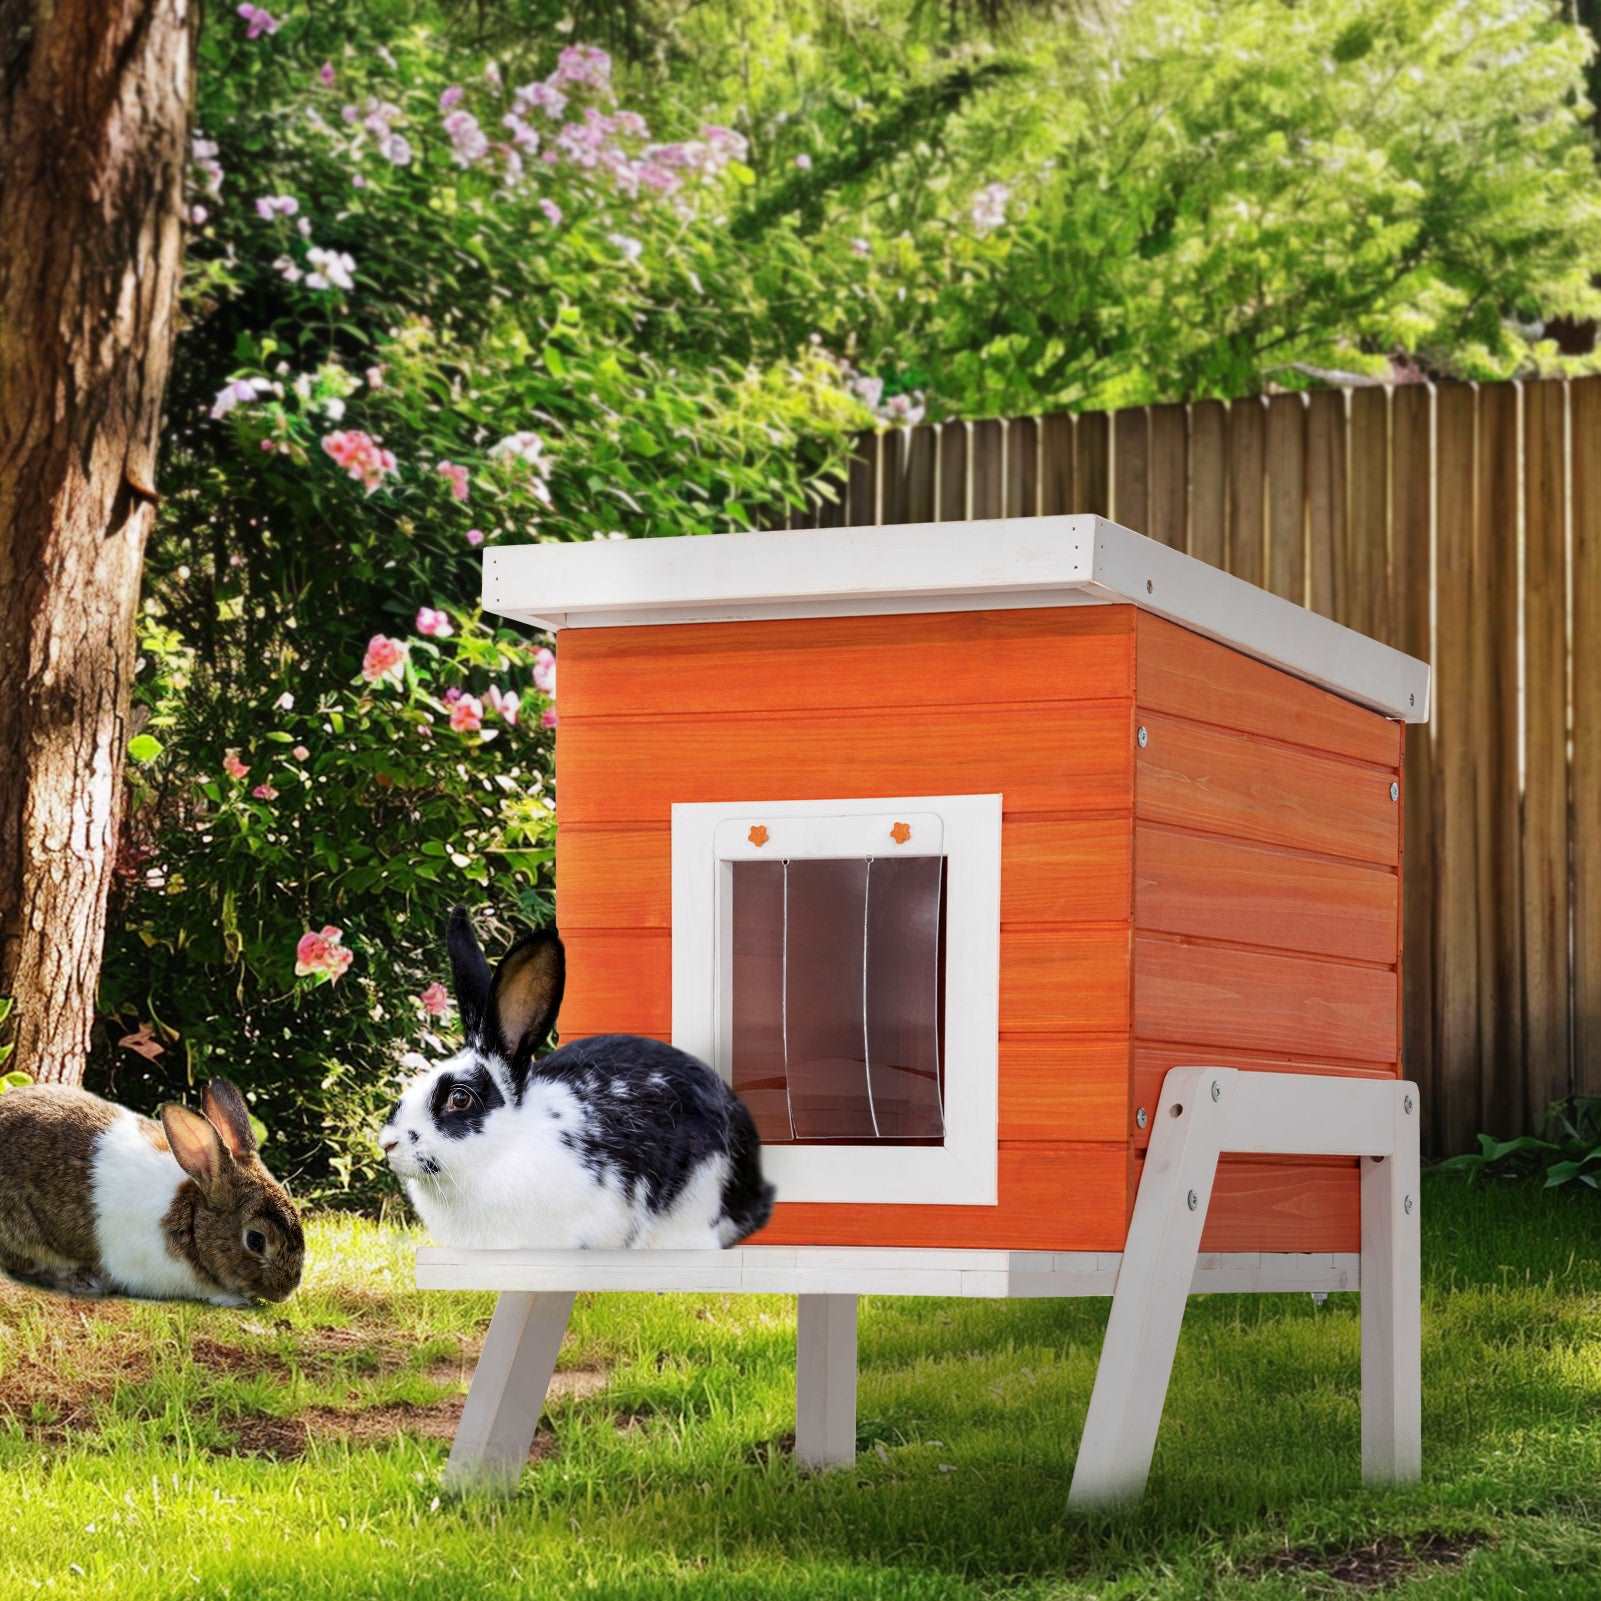 petsfit-cat-house-outdoor-insulated-high-feet-feeding-station-door-curtain-wood-outside-cat-house-bunny-rabbit-hutch-orange-08